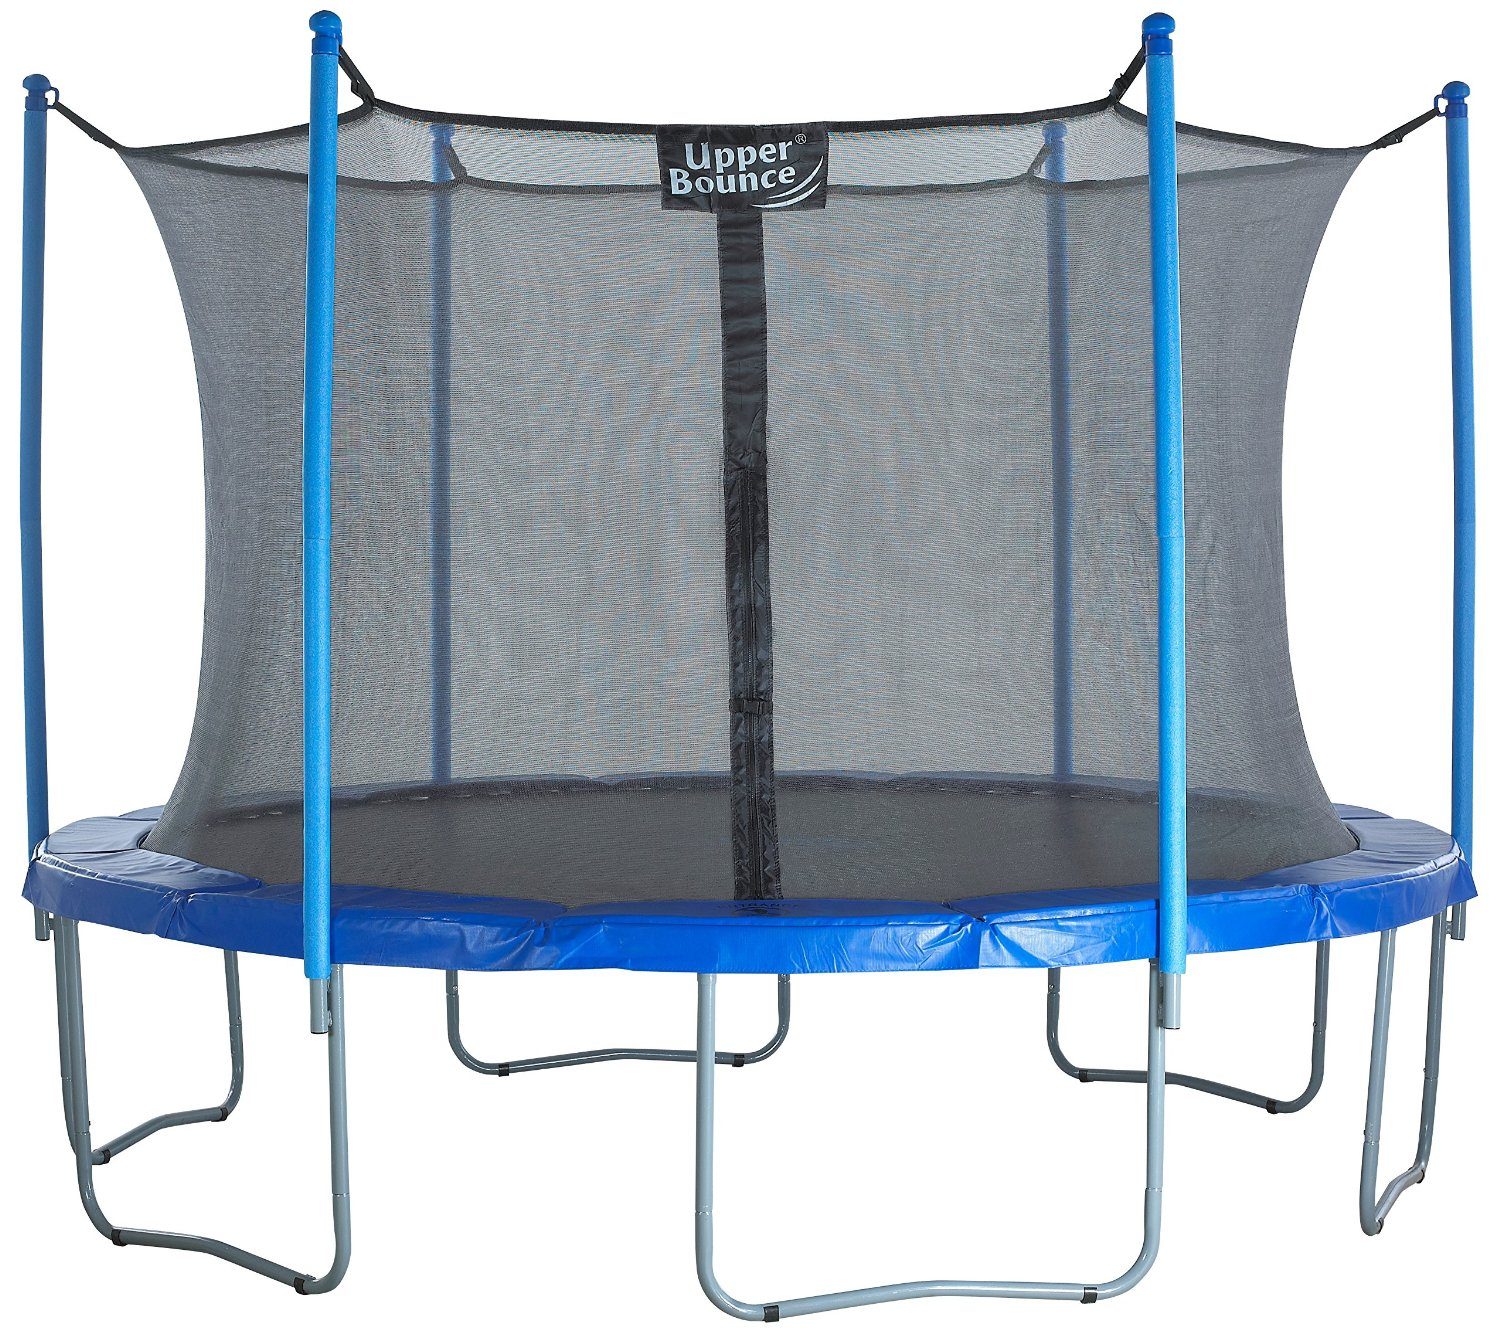 Upper Bounce 14 Foot Trampoline and Enclosure Set